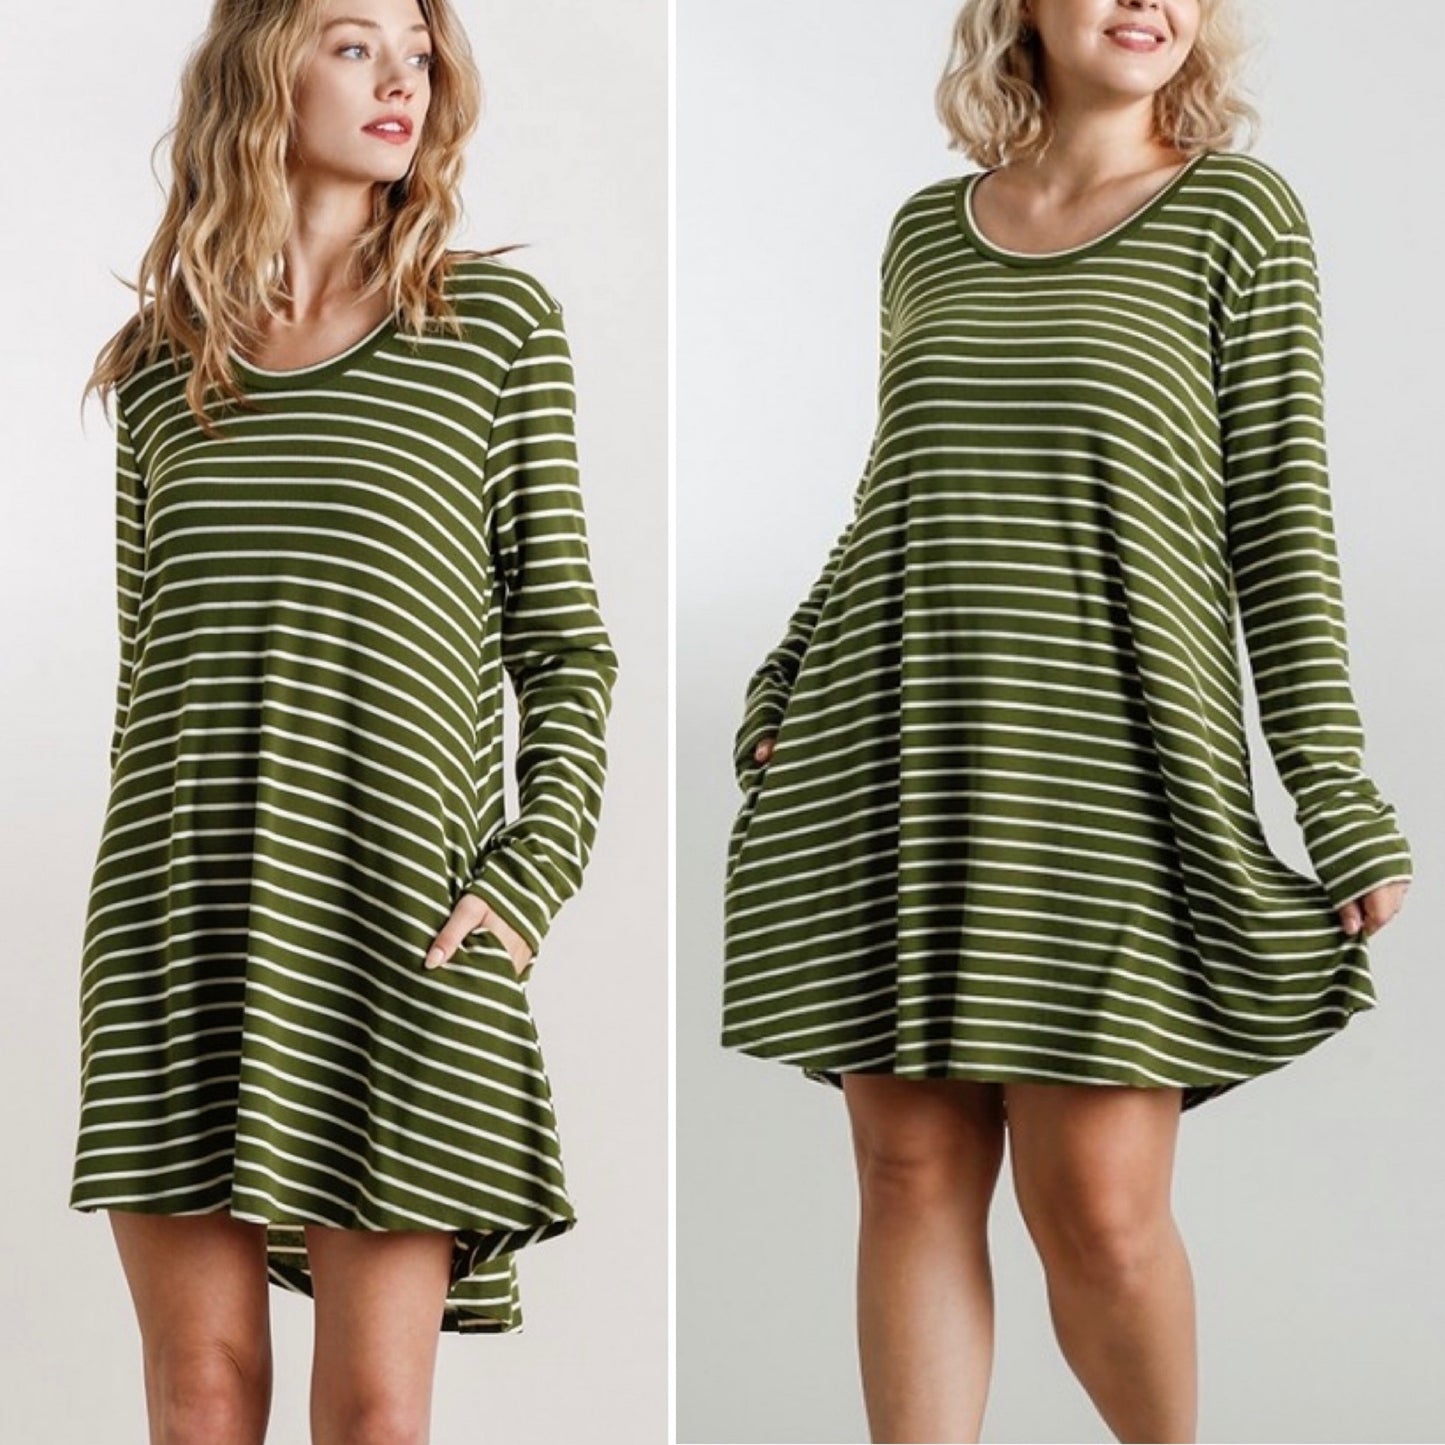 The Willow Dress